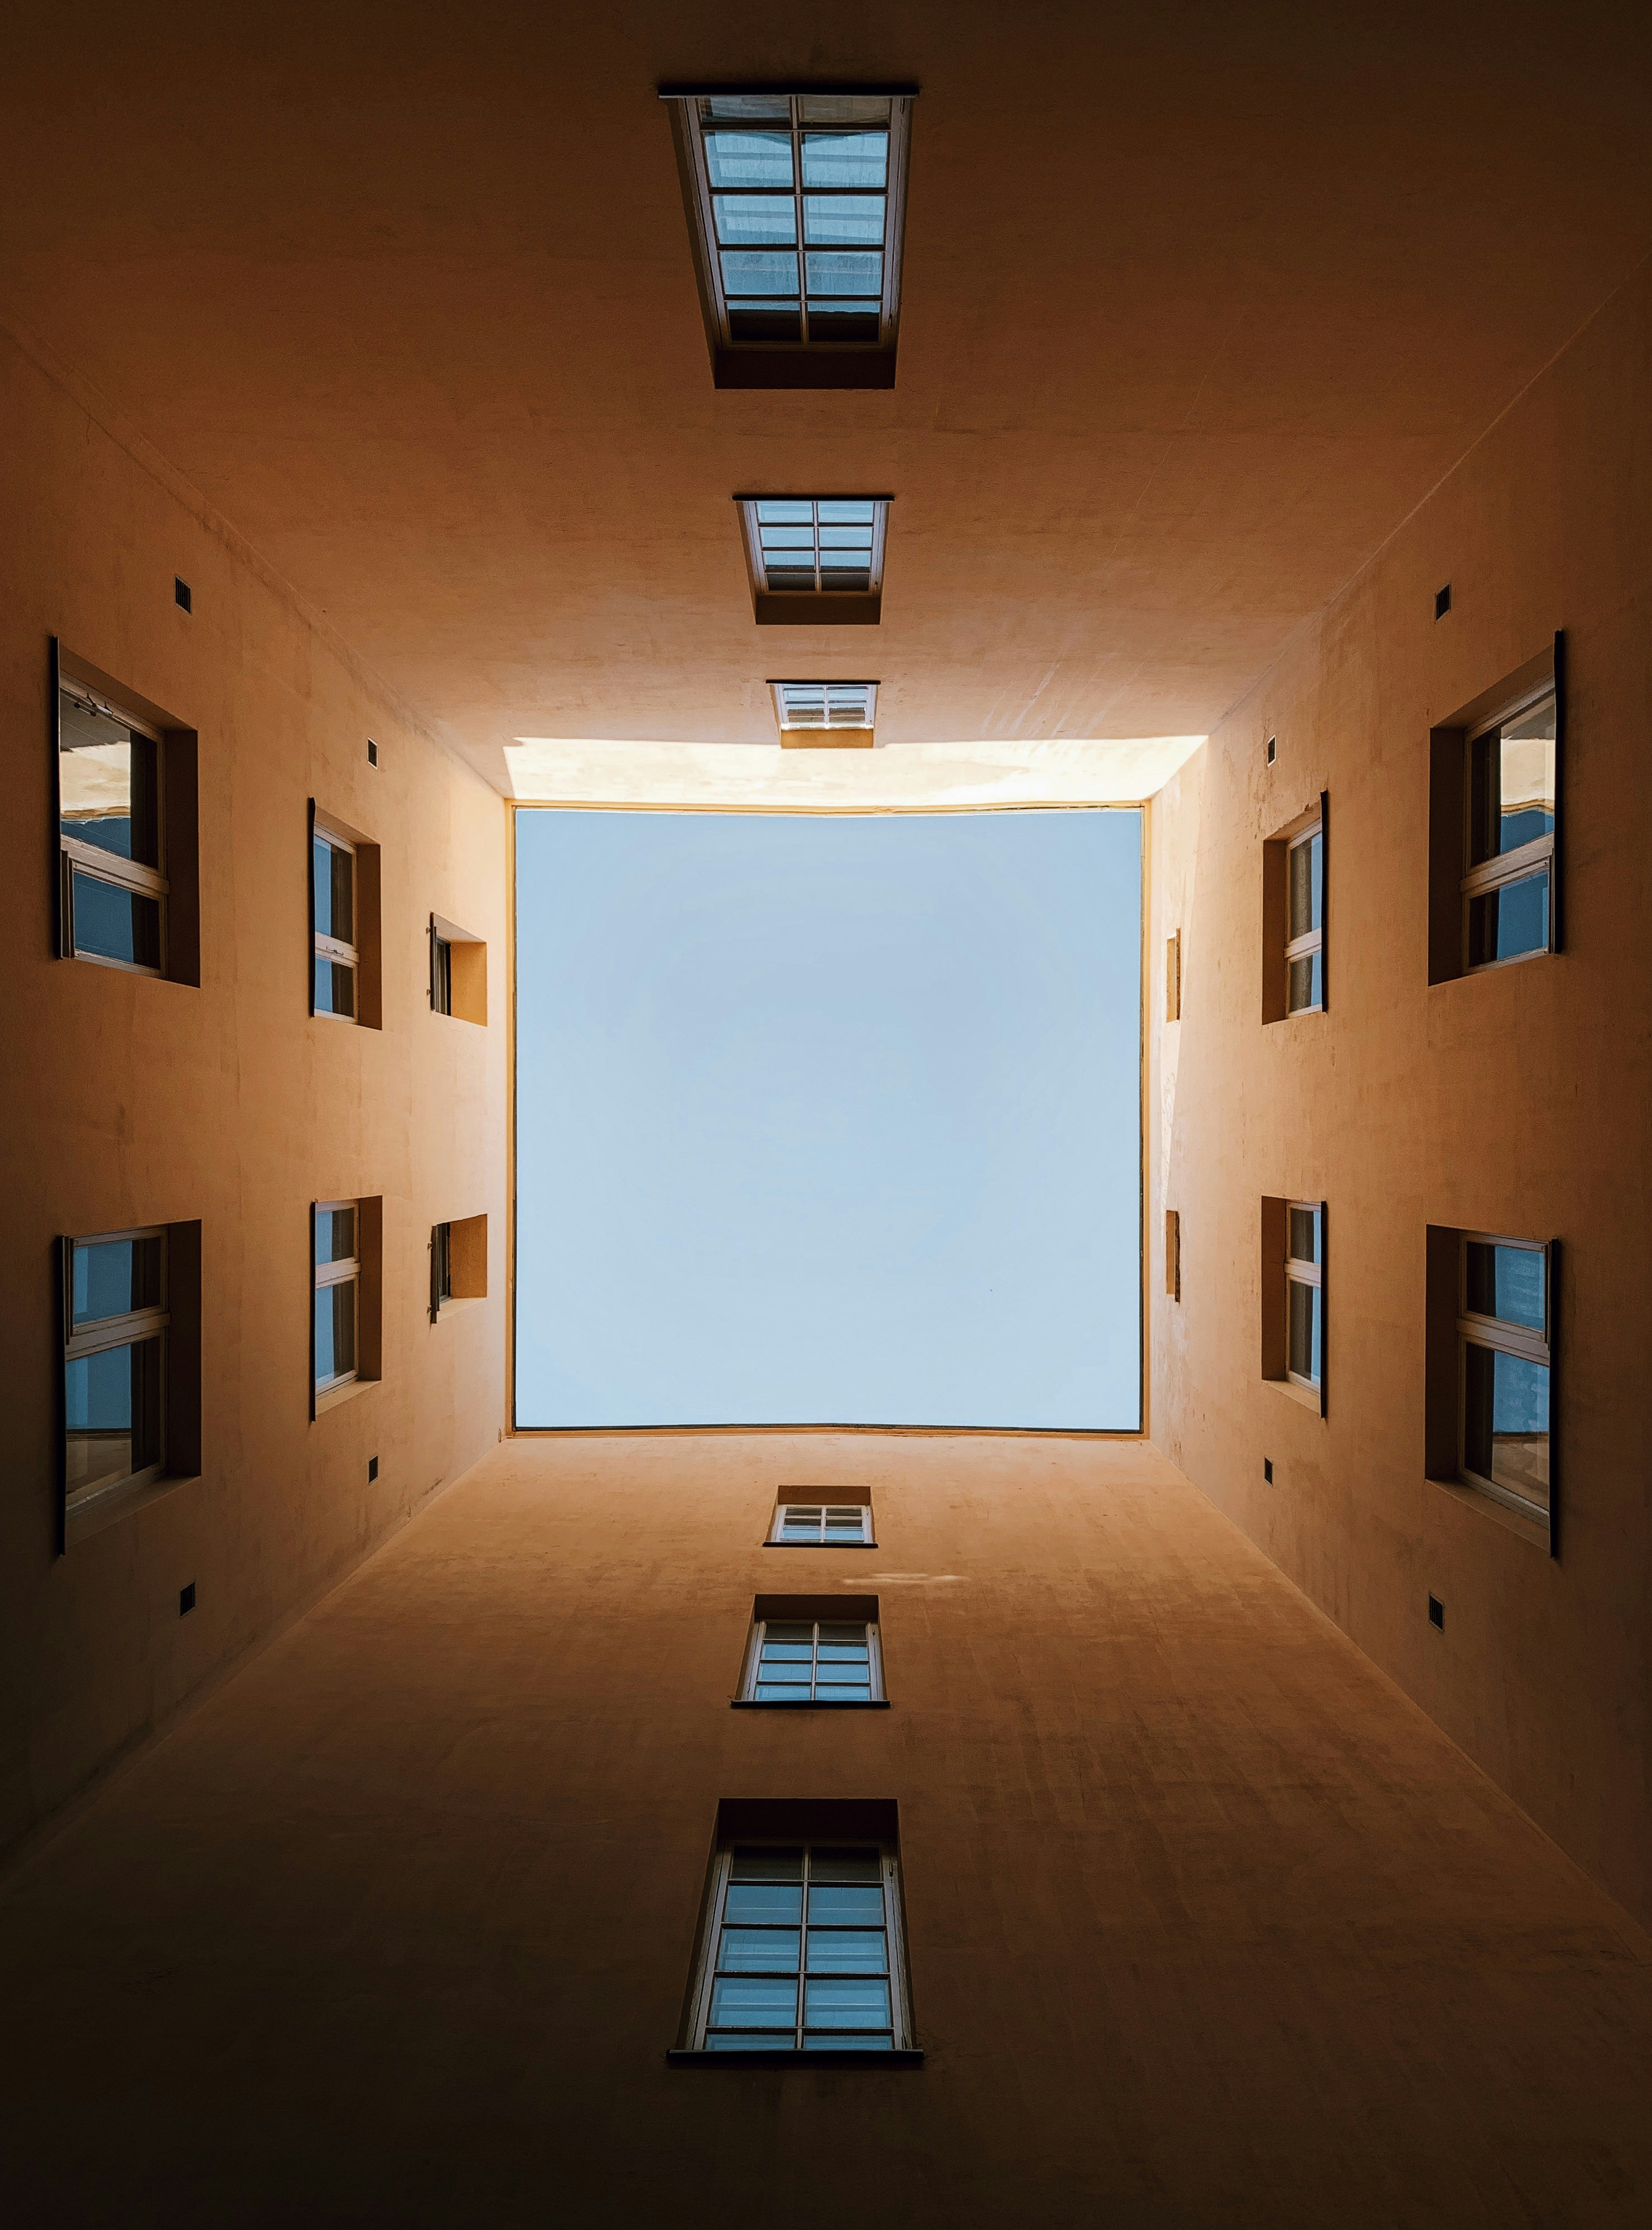 Courtyard of a yellow apartment building